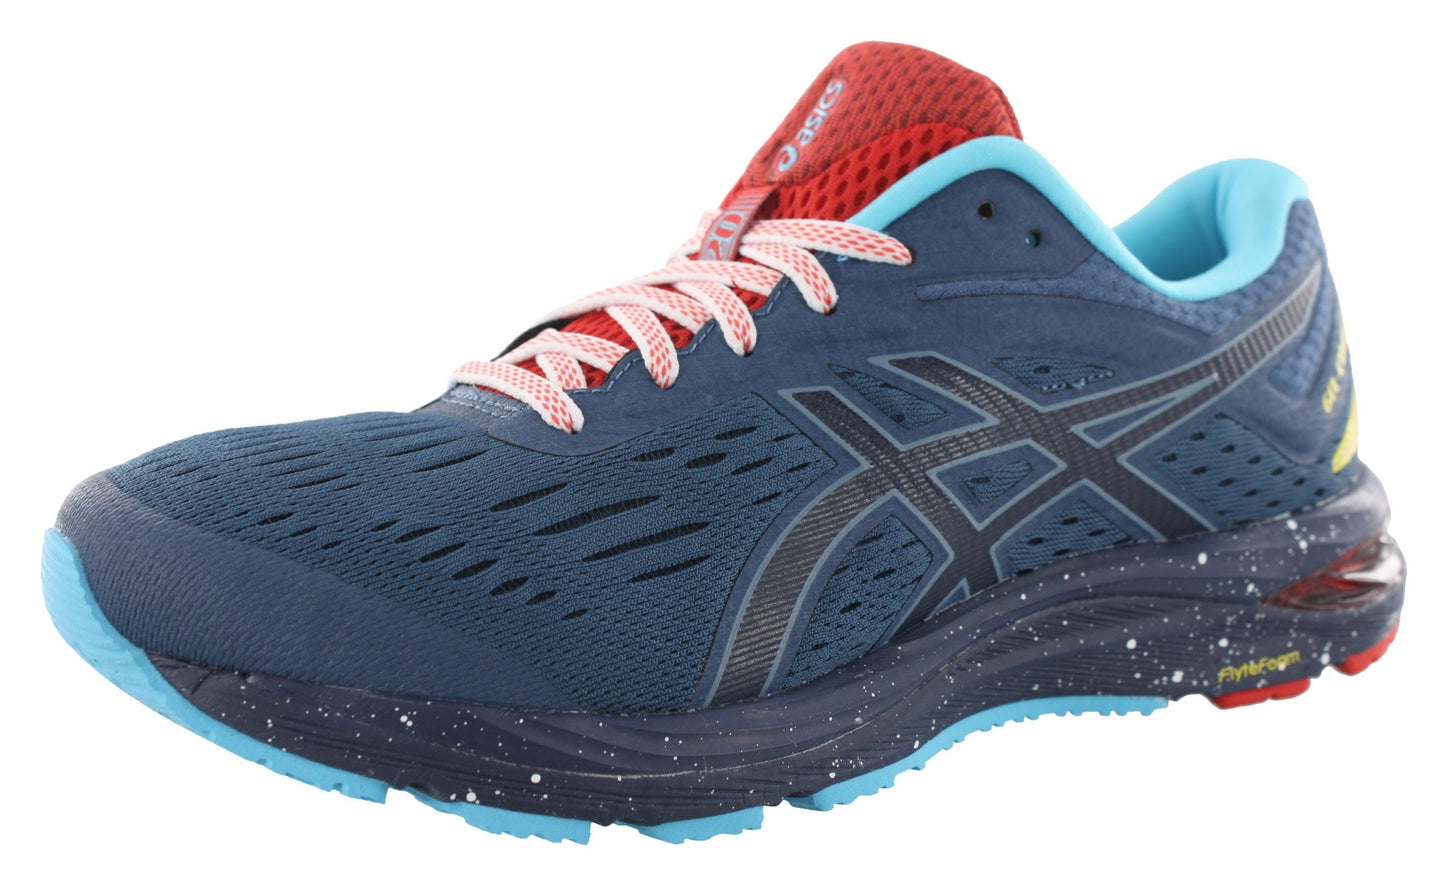 Lateral of Grand Shark and Peacoat colored ASICS Gel Cumulus 20 LE Men's Running Shoes for Underpronation